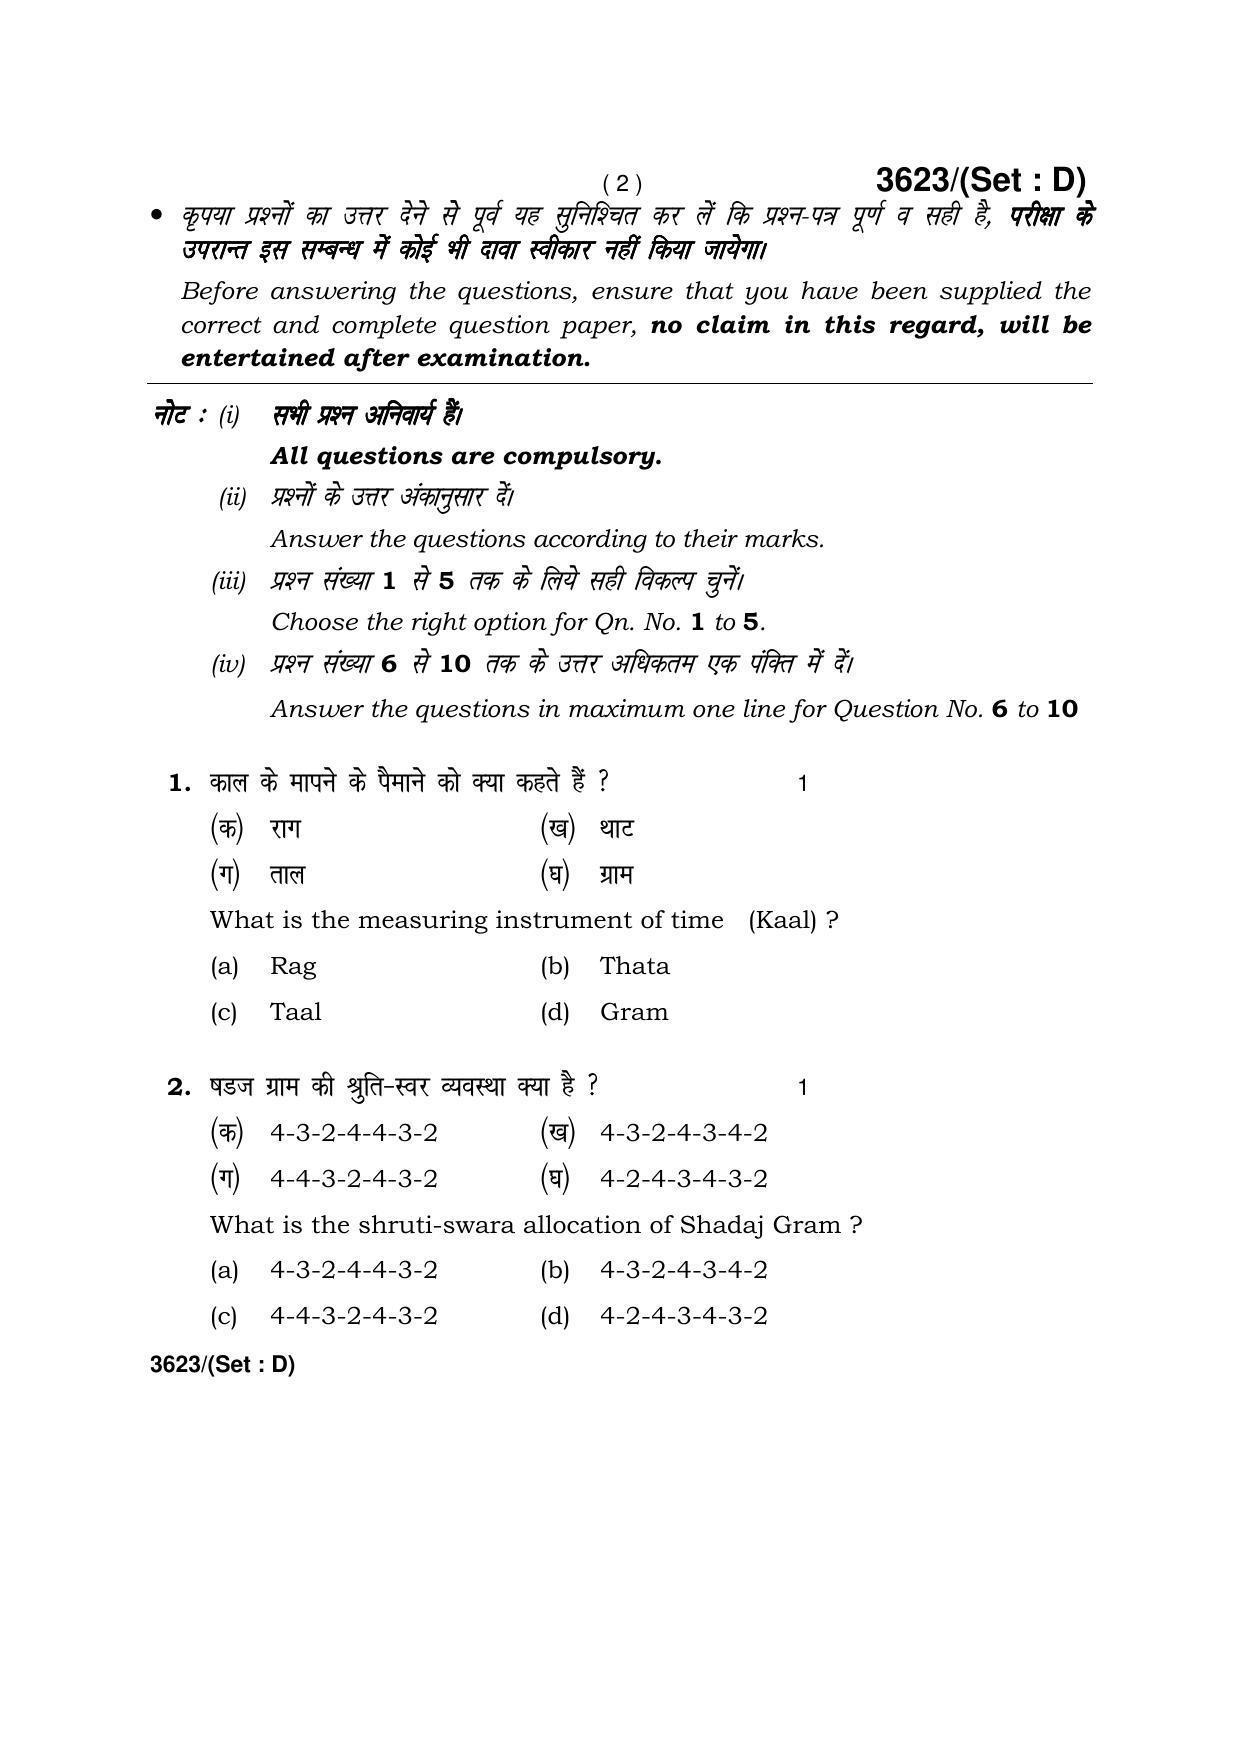 Haryana Board HBSE Class 12 Music Hindustani (Vocal) -D 2018 Question Paper - Page 2